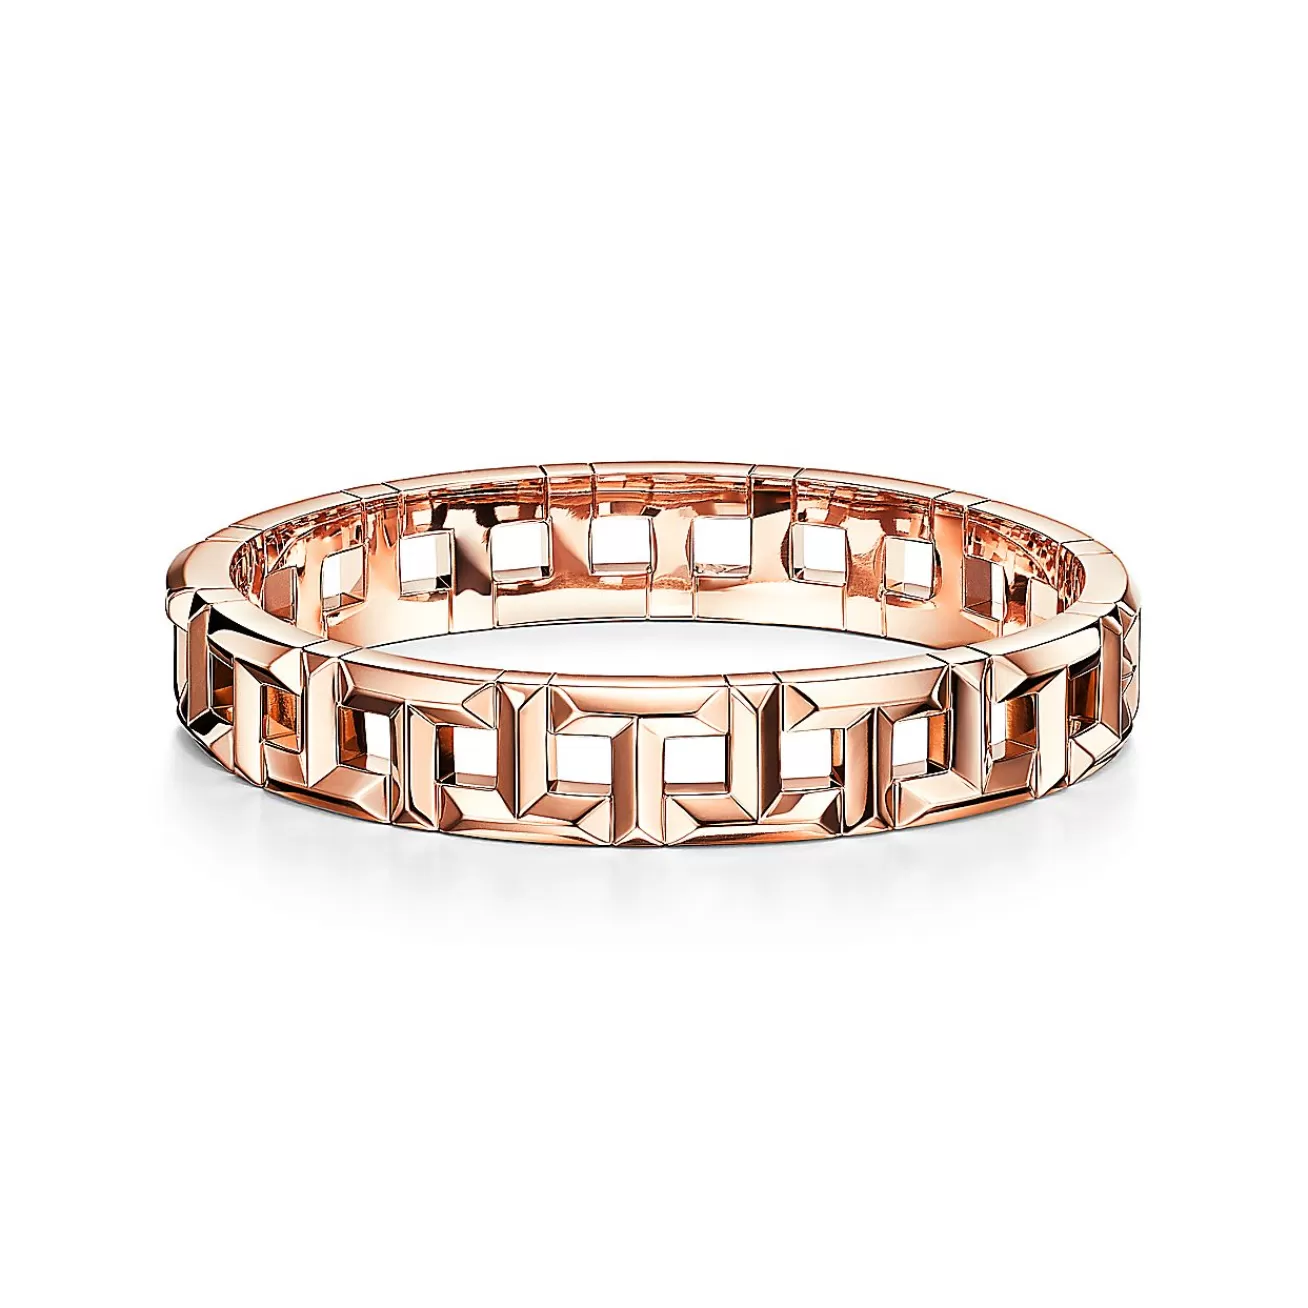 Tiffany & Co. Tiffany T True wide hinged bangle in 18k rose gold, large. | ^ Rose Gold Jewelry | Tiffany T